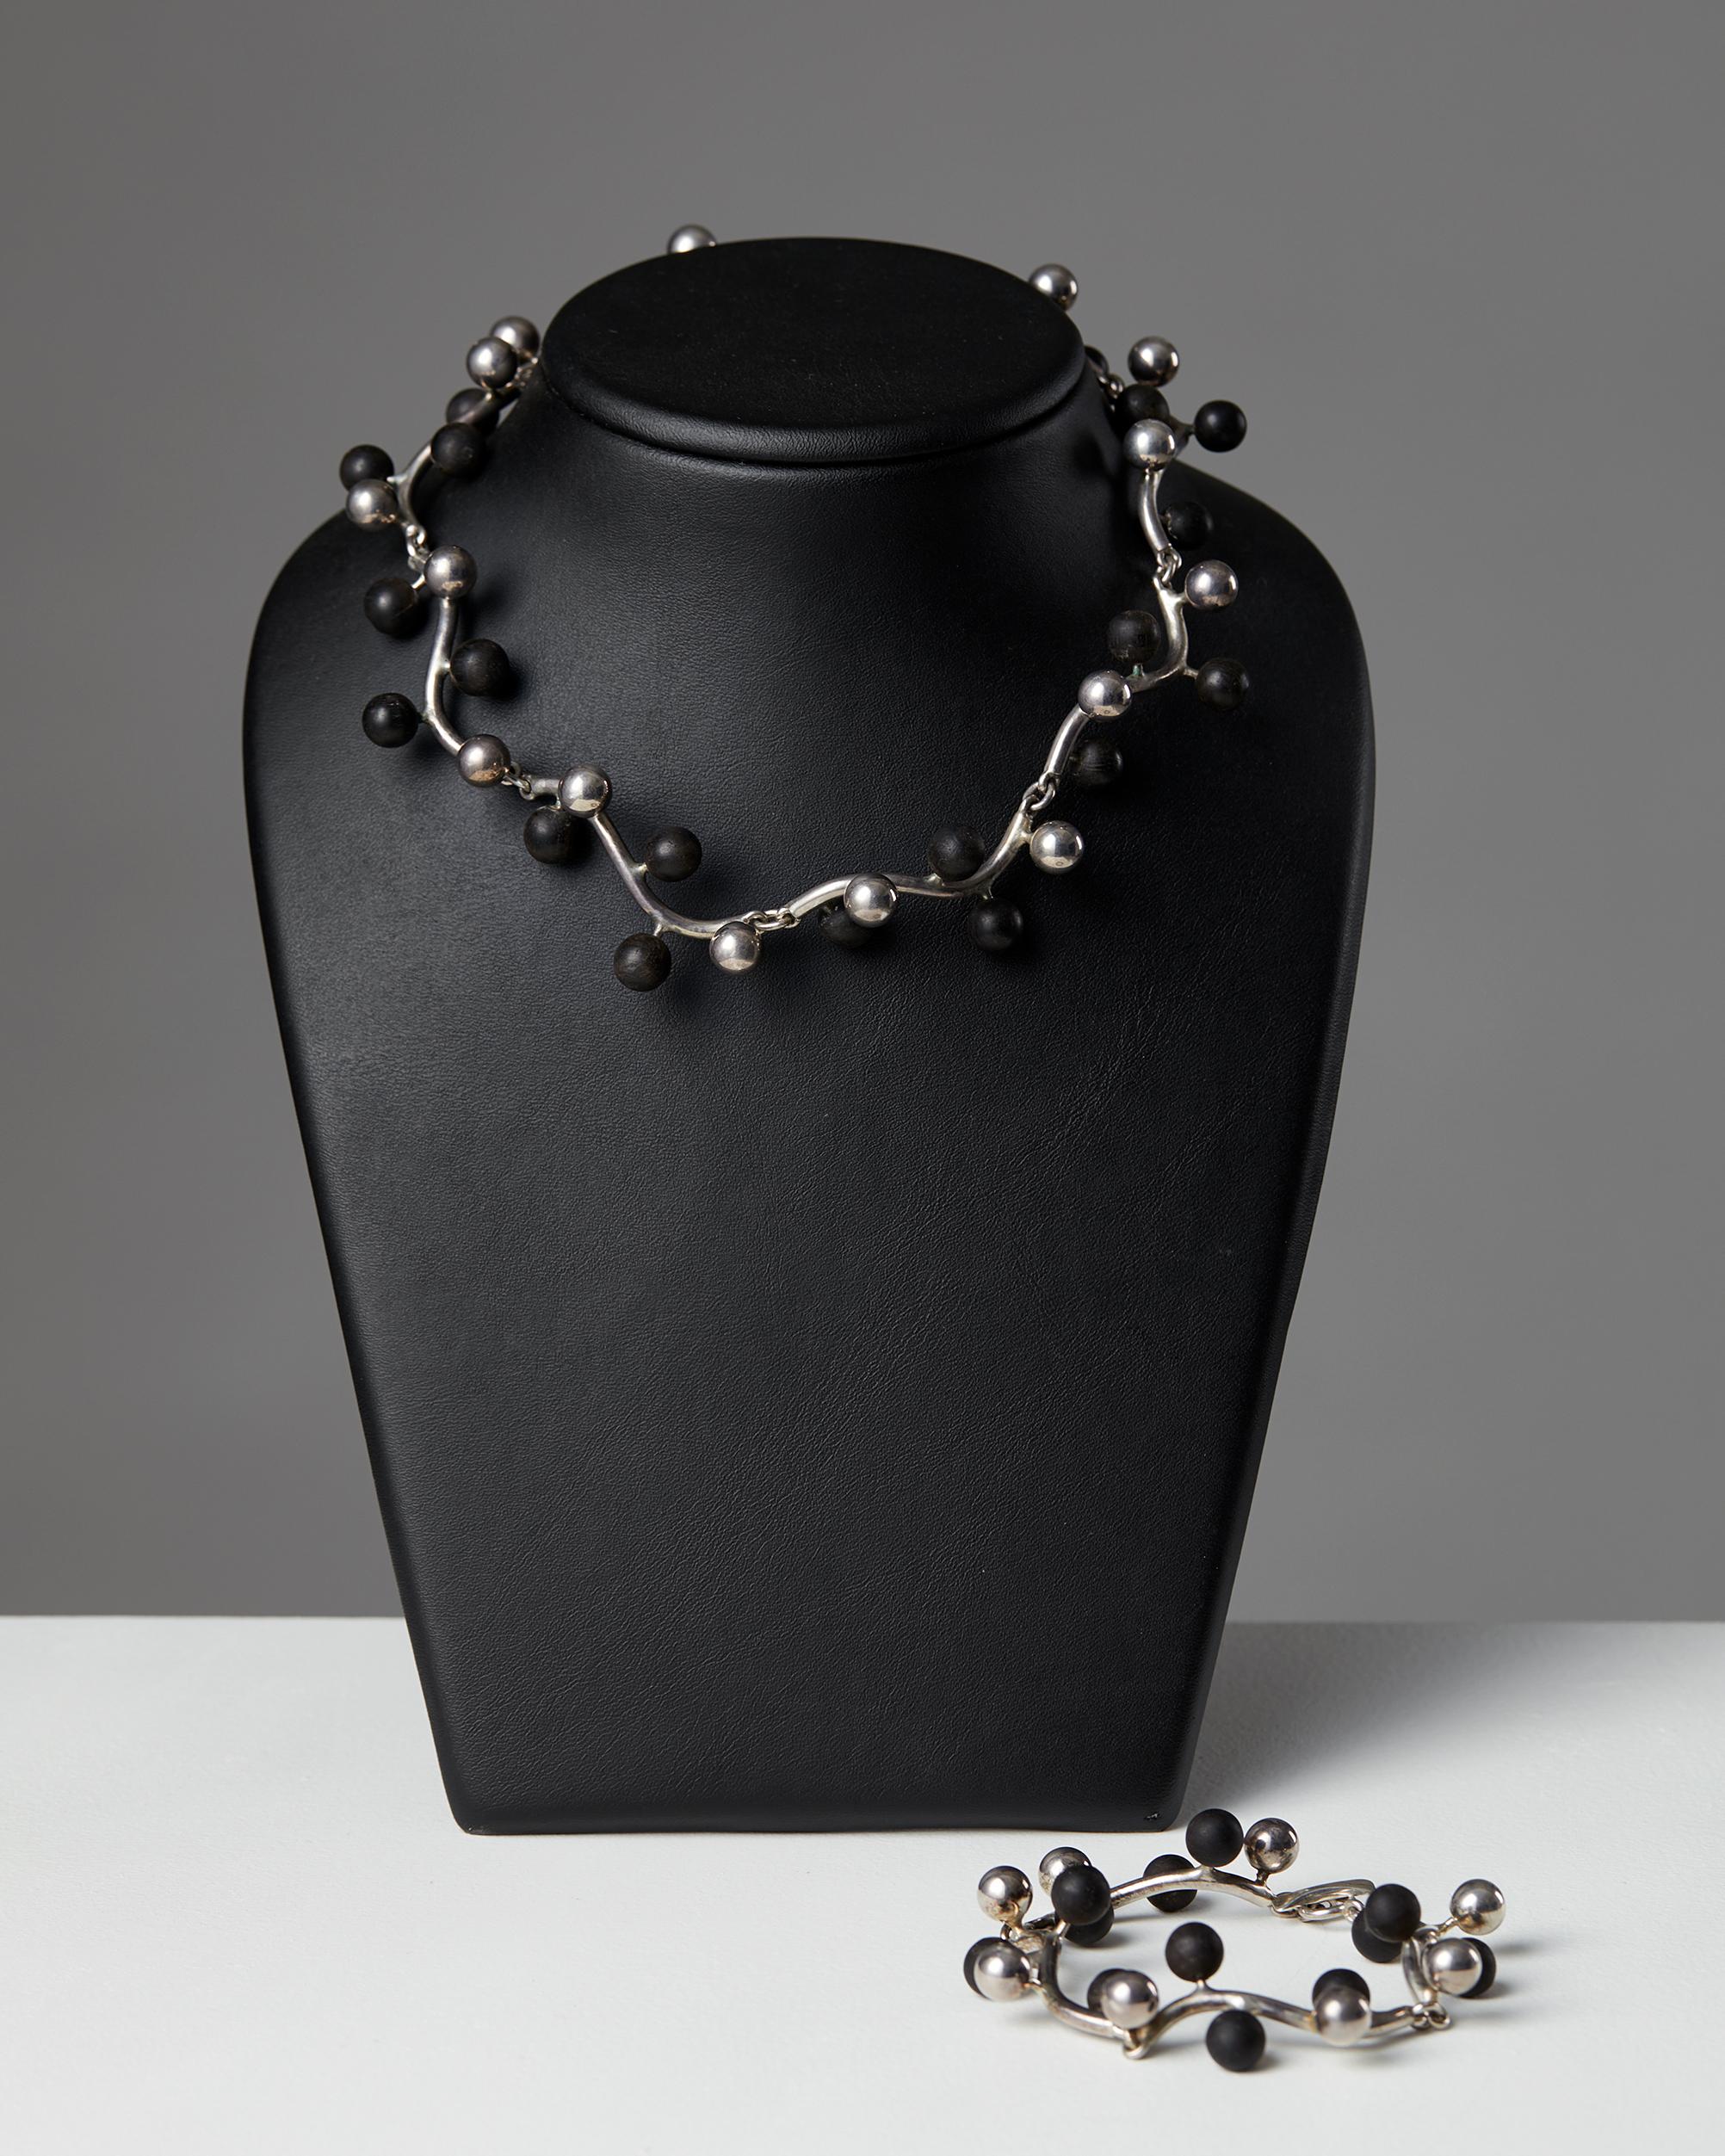 Sterling silver with onyx beads.

Marked C.A

Necklace:
L: 36 cm/ 1' 2